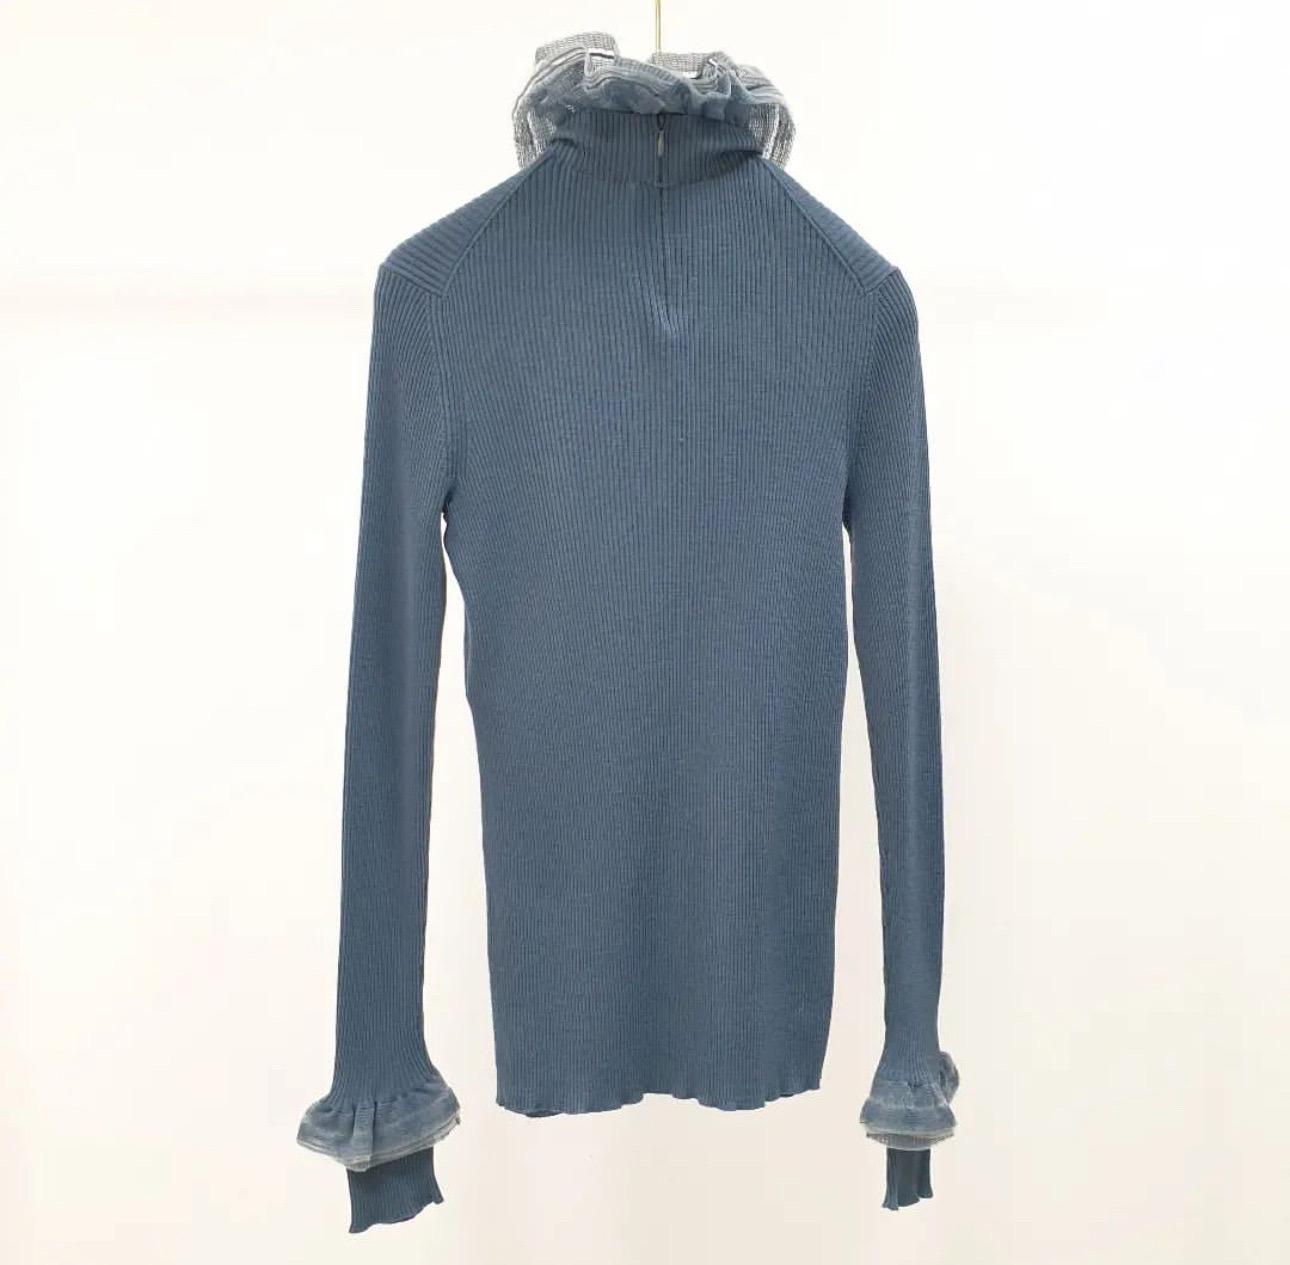 Chanel Grey Blue Wool Knit & Mesh Ruffled Turtleneck Sweater In Good Condition For Sale In Krakow, PL